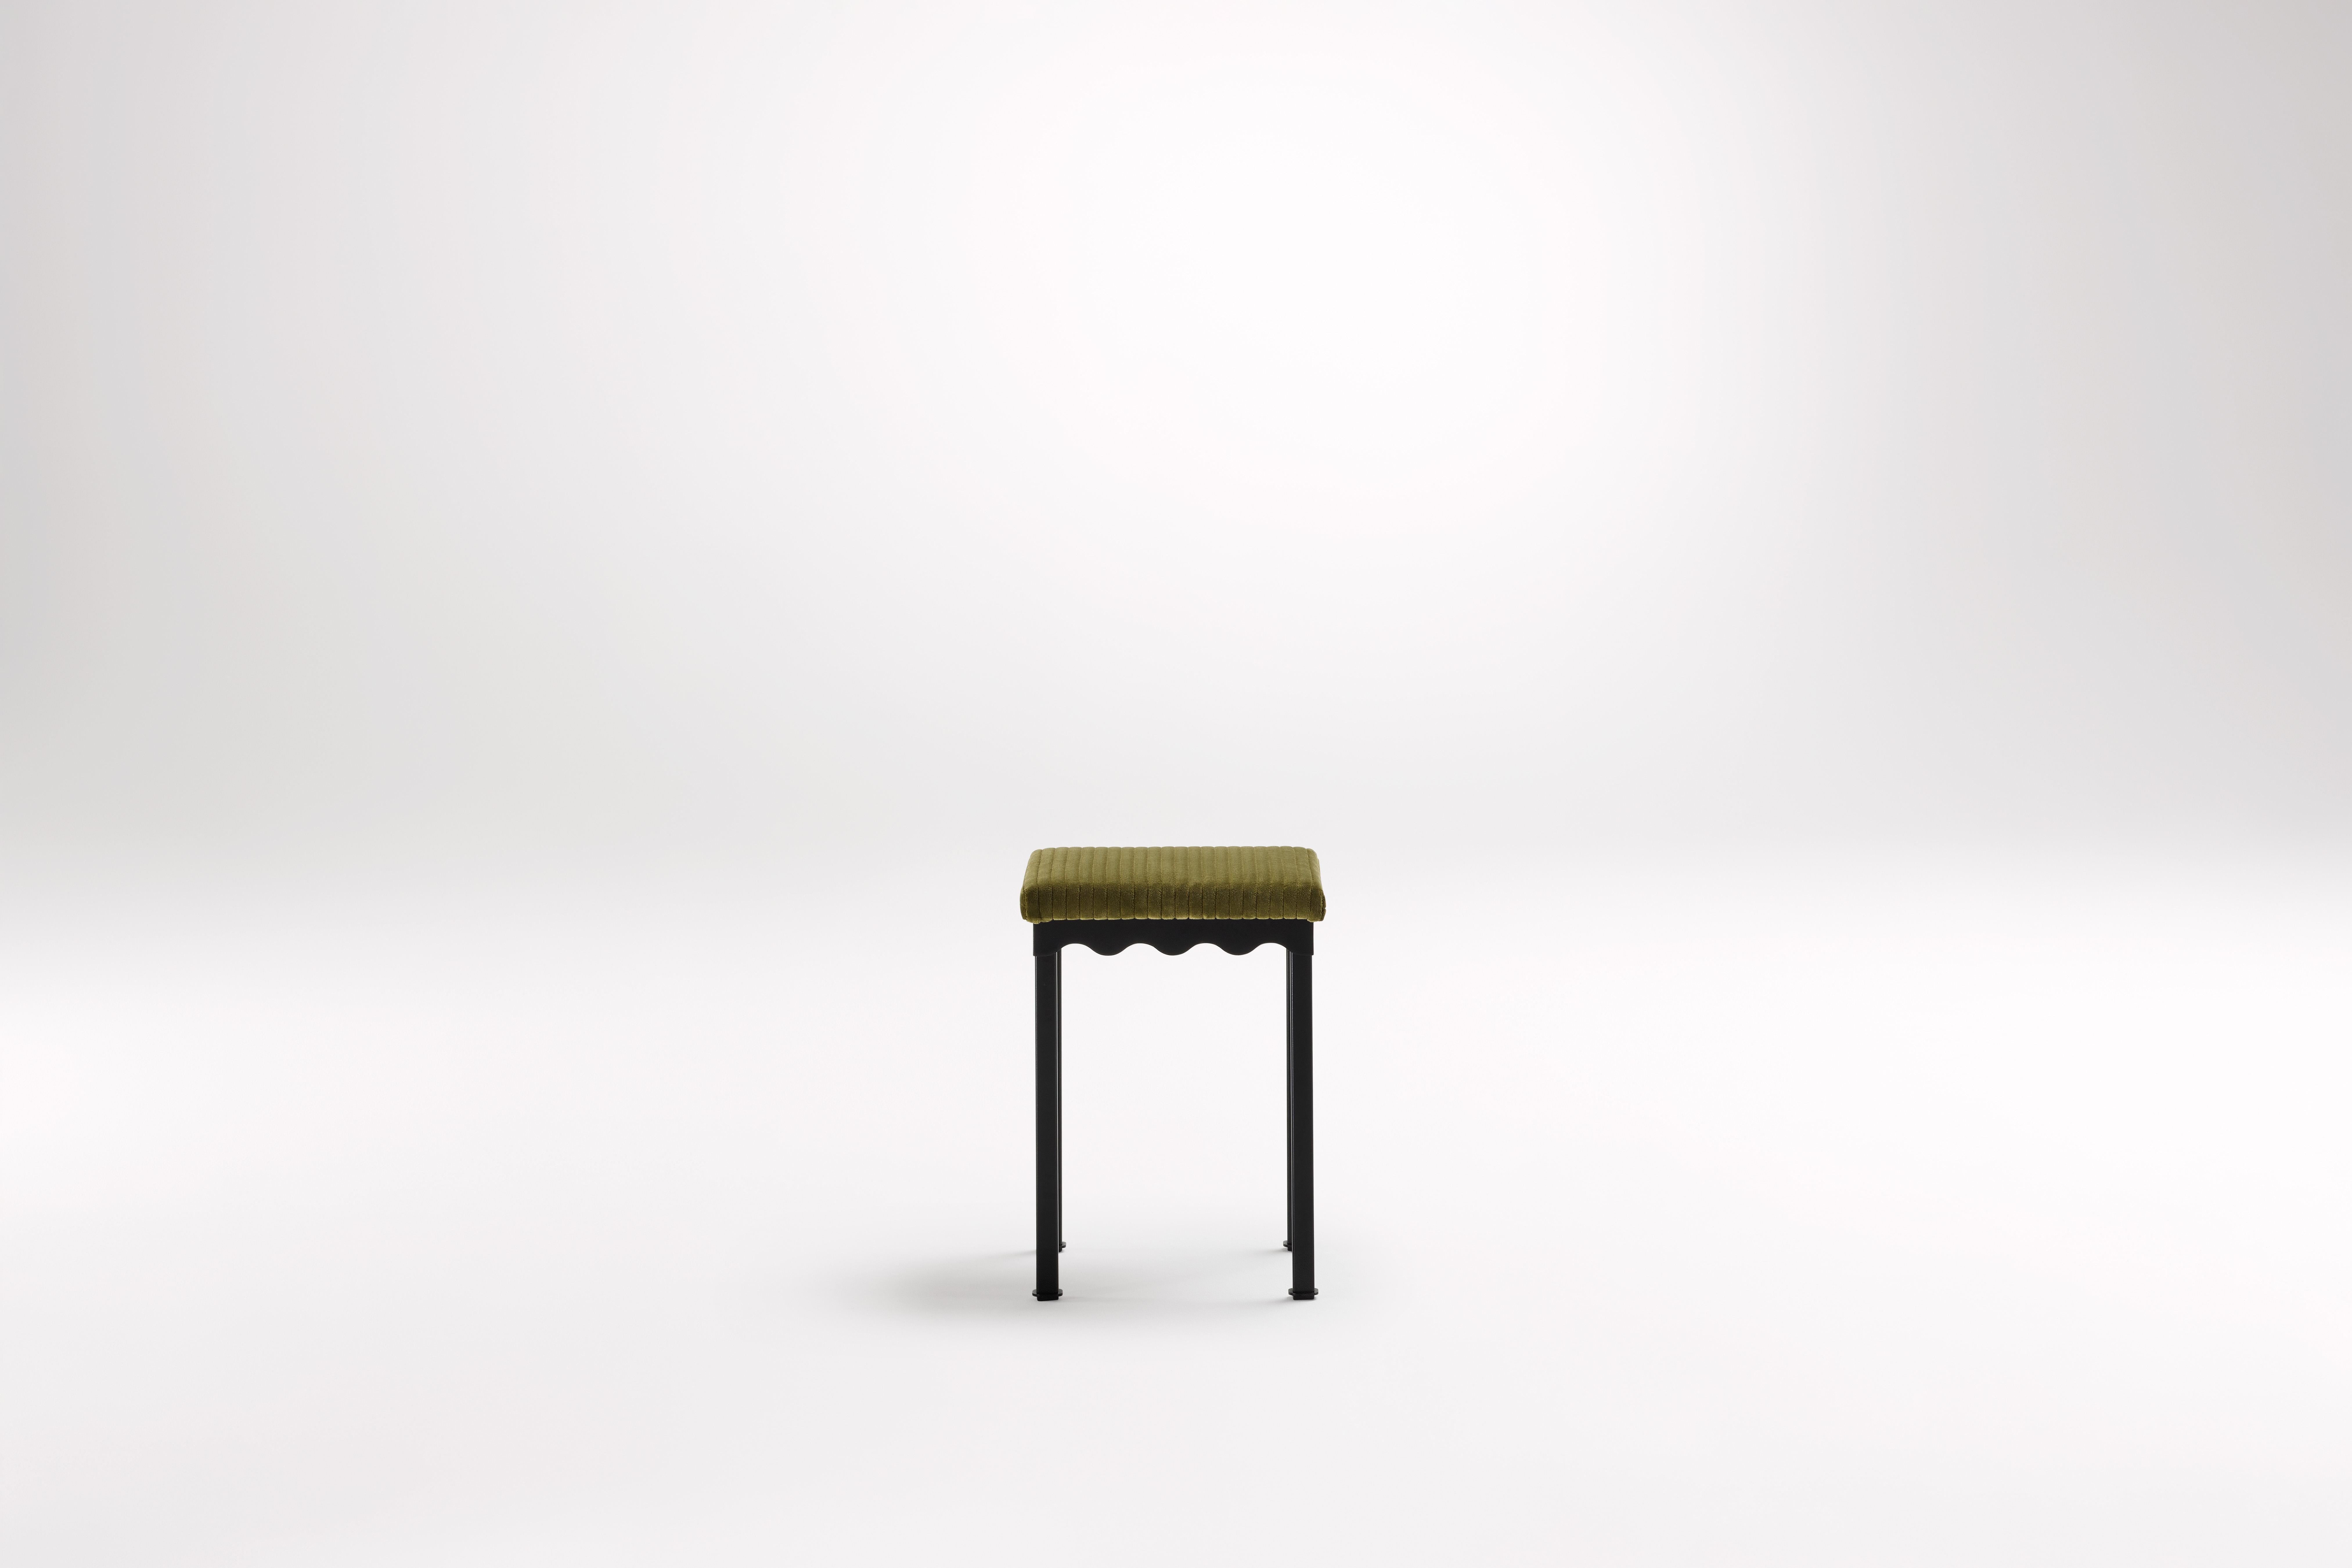 Oleander Bellini Low Stool by Coco Flip
Dimensions: D 34 x W 34 x H 45 cm
Materials: Timber / Stone tops, Powder-coated steel frame. 
Weight: 5 kg
Frame Finishes: Textura Black.

Coco Flip is a Melbourne based furniture and lighting design studio,